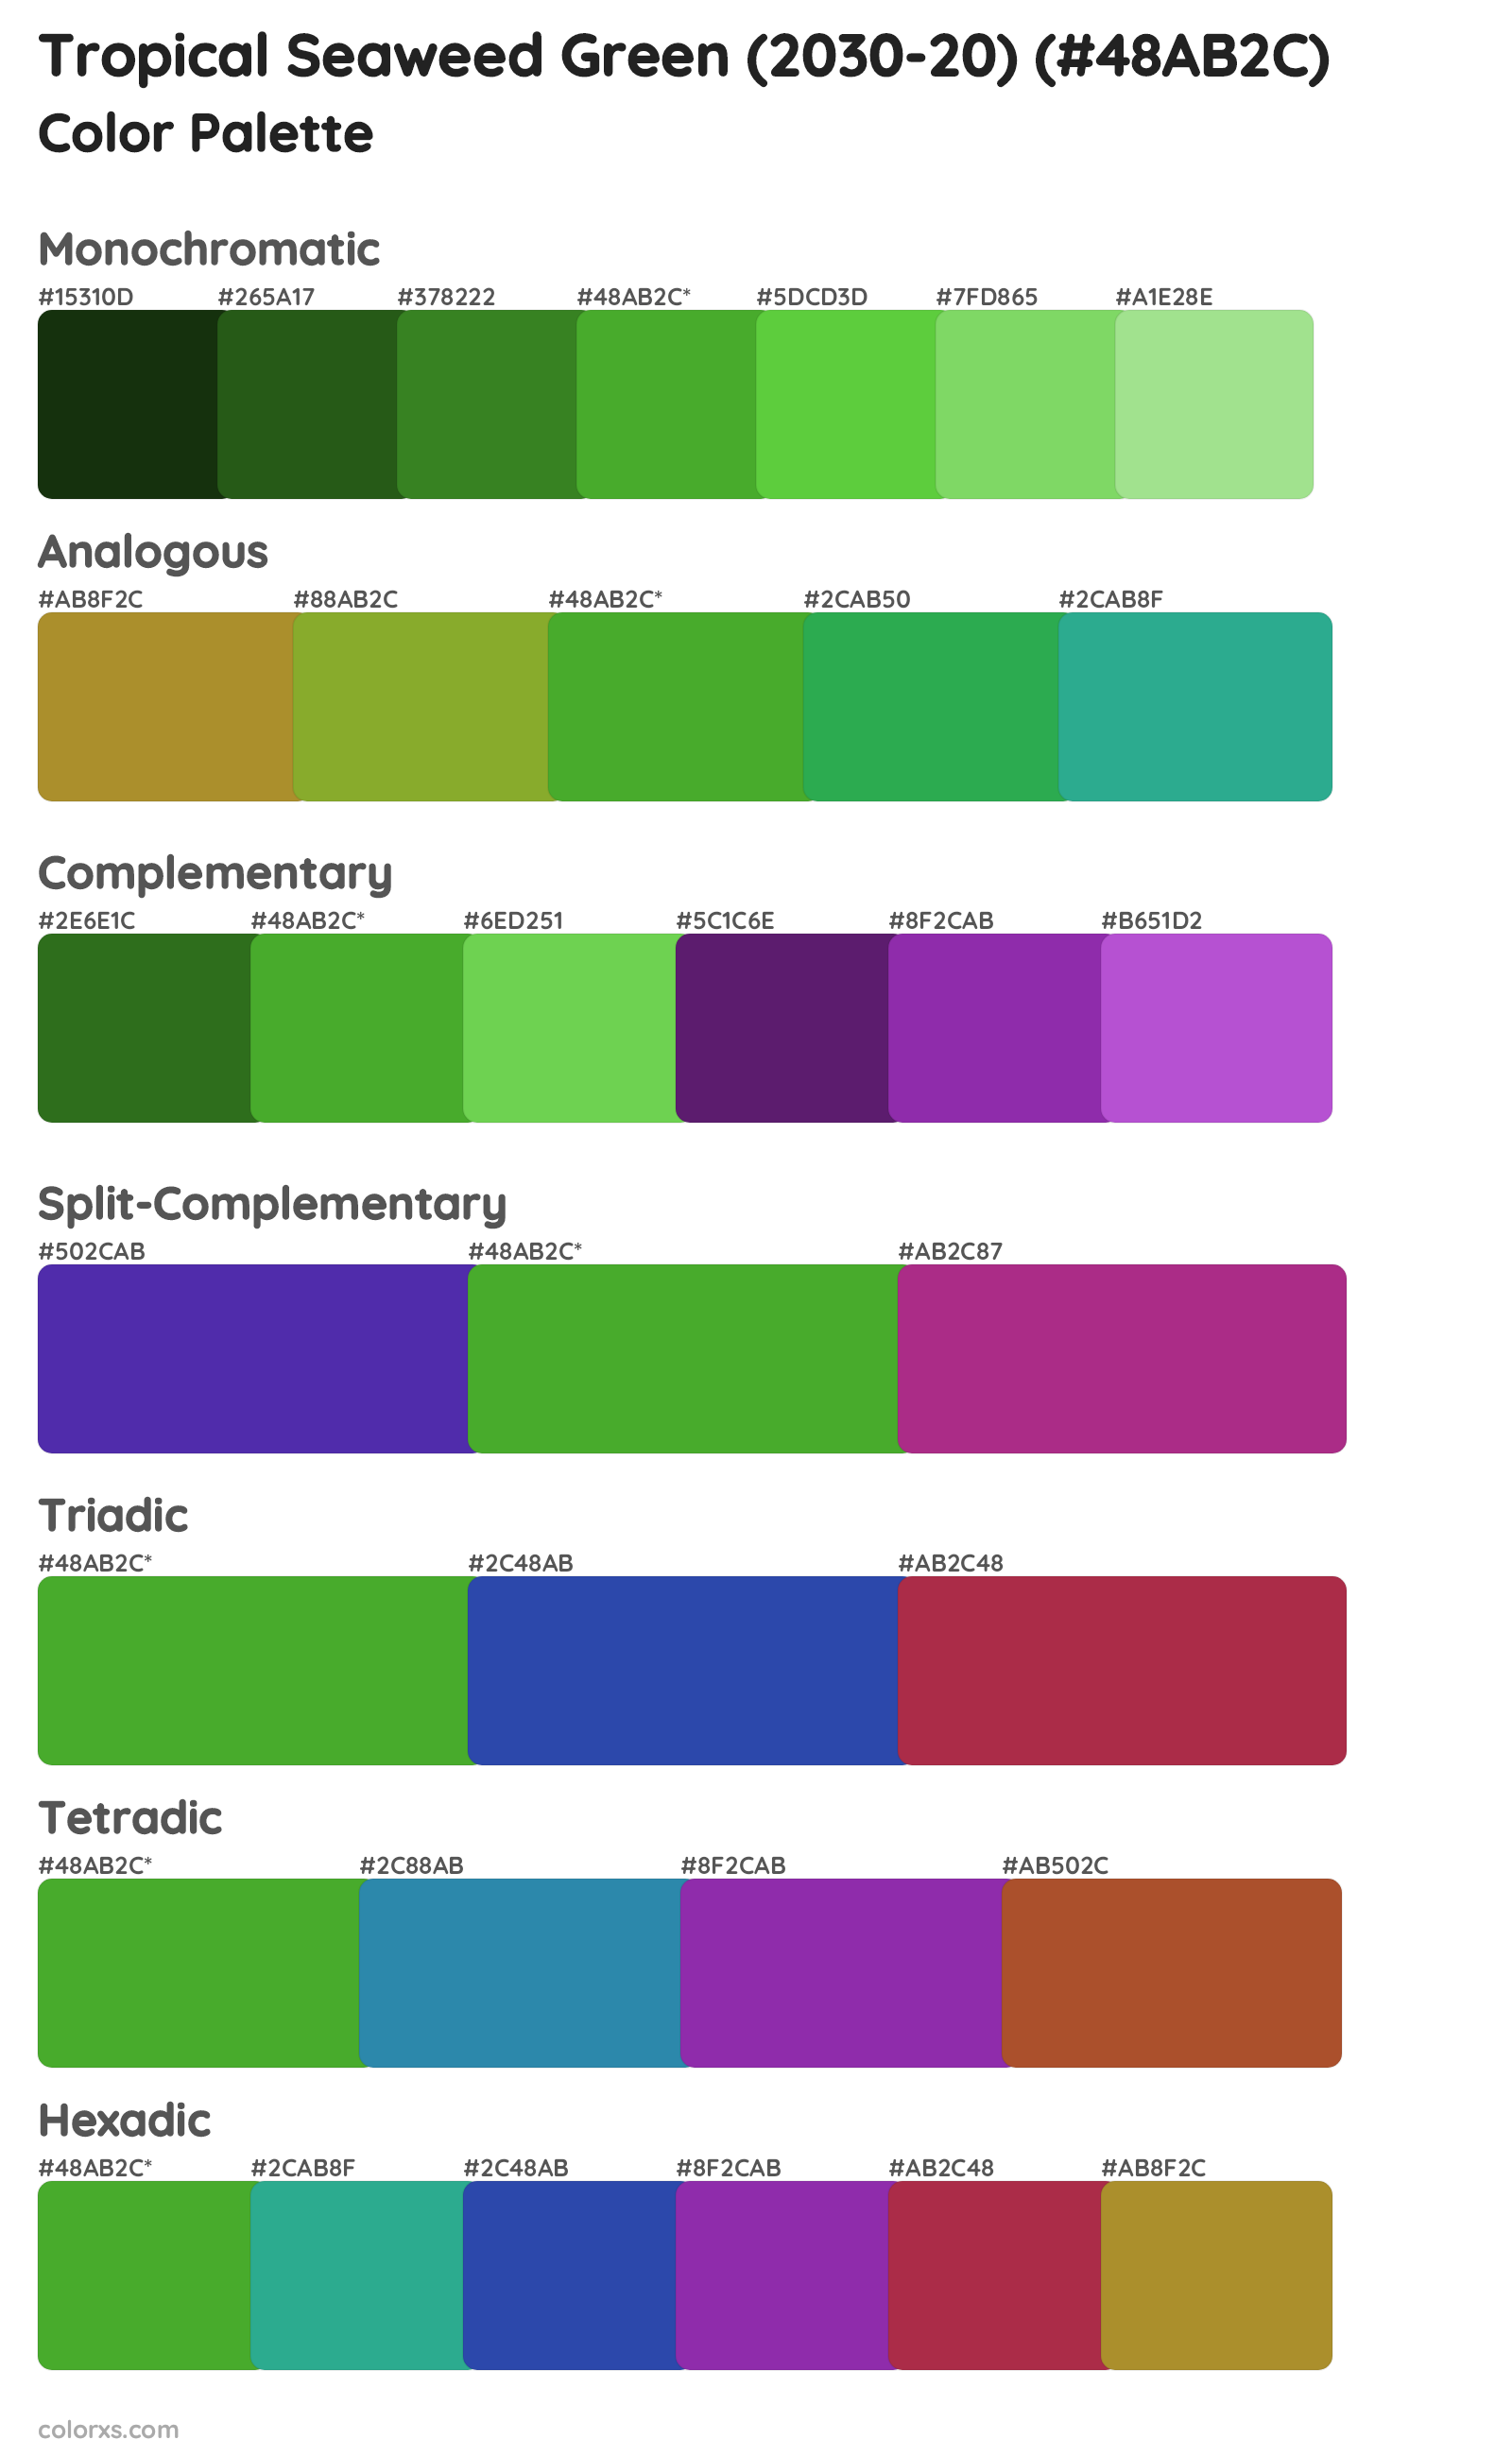 Tropical Seaweed Green (2030-20) Color Scheme Palettes